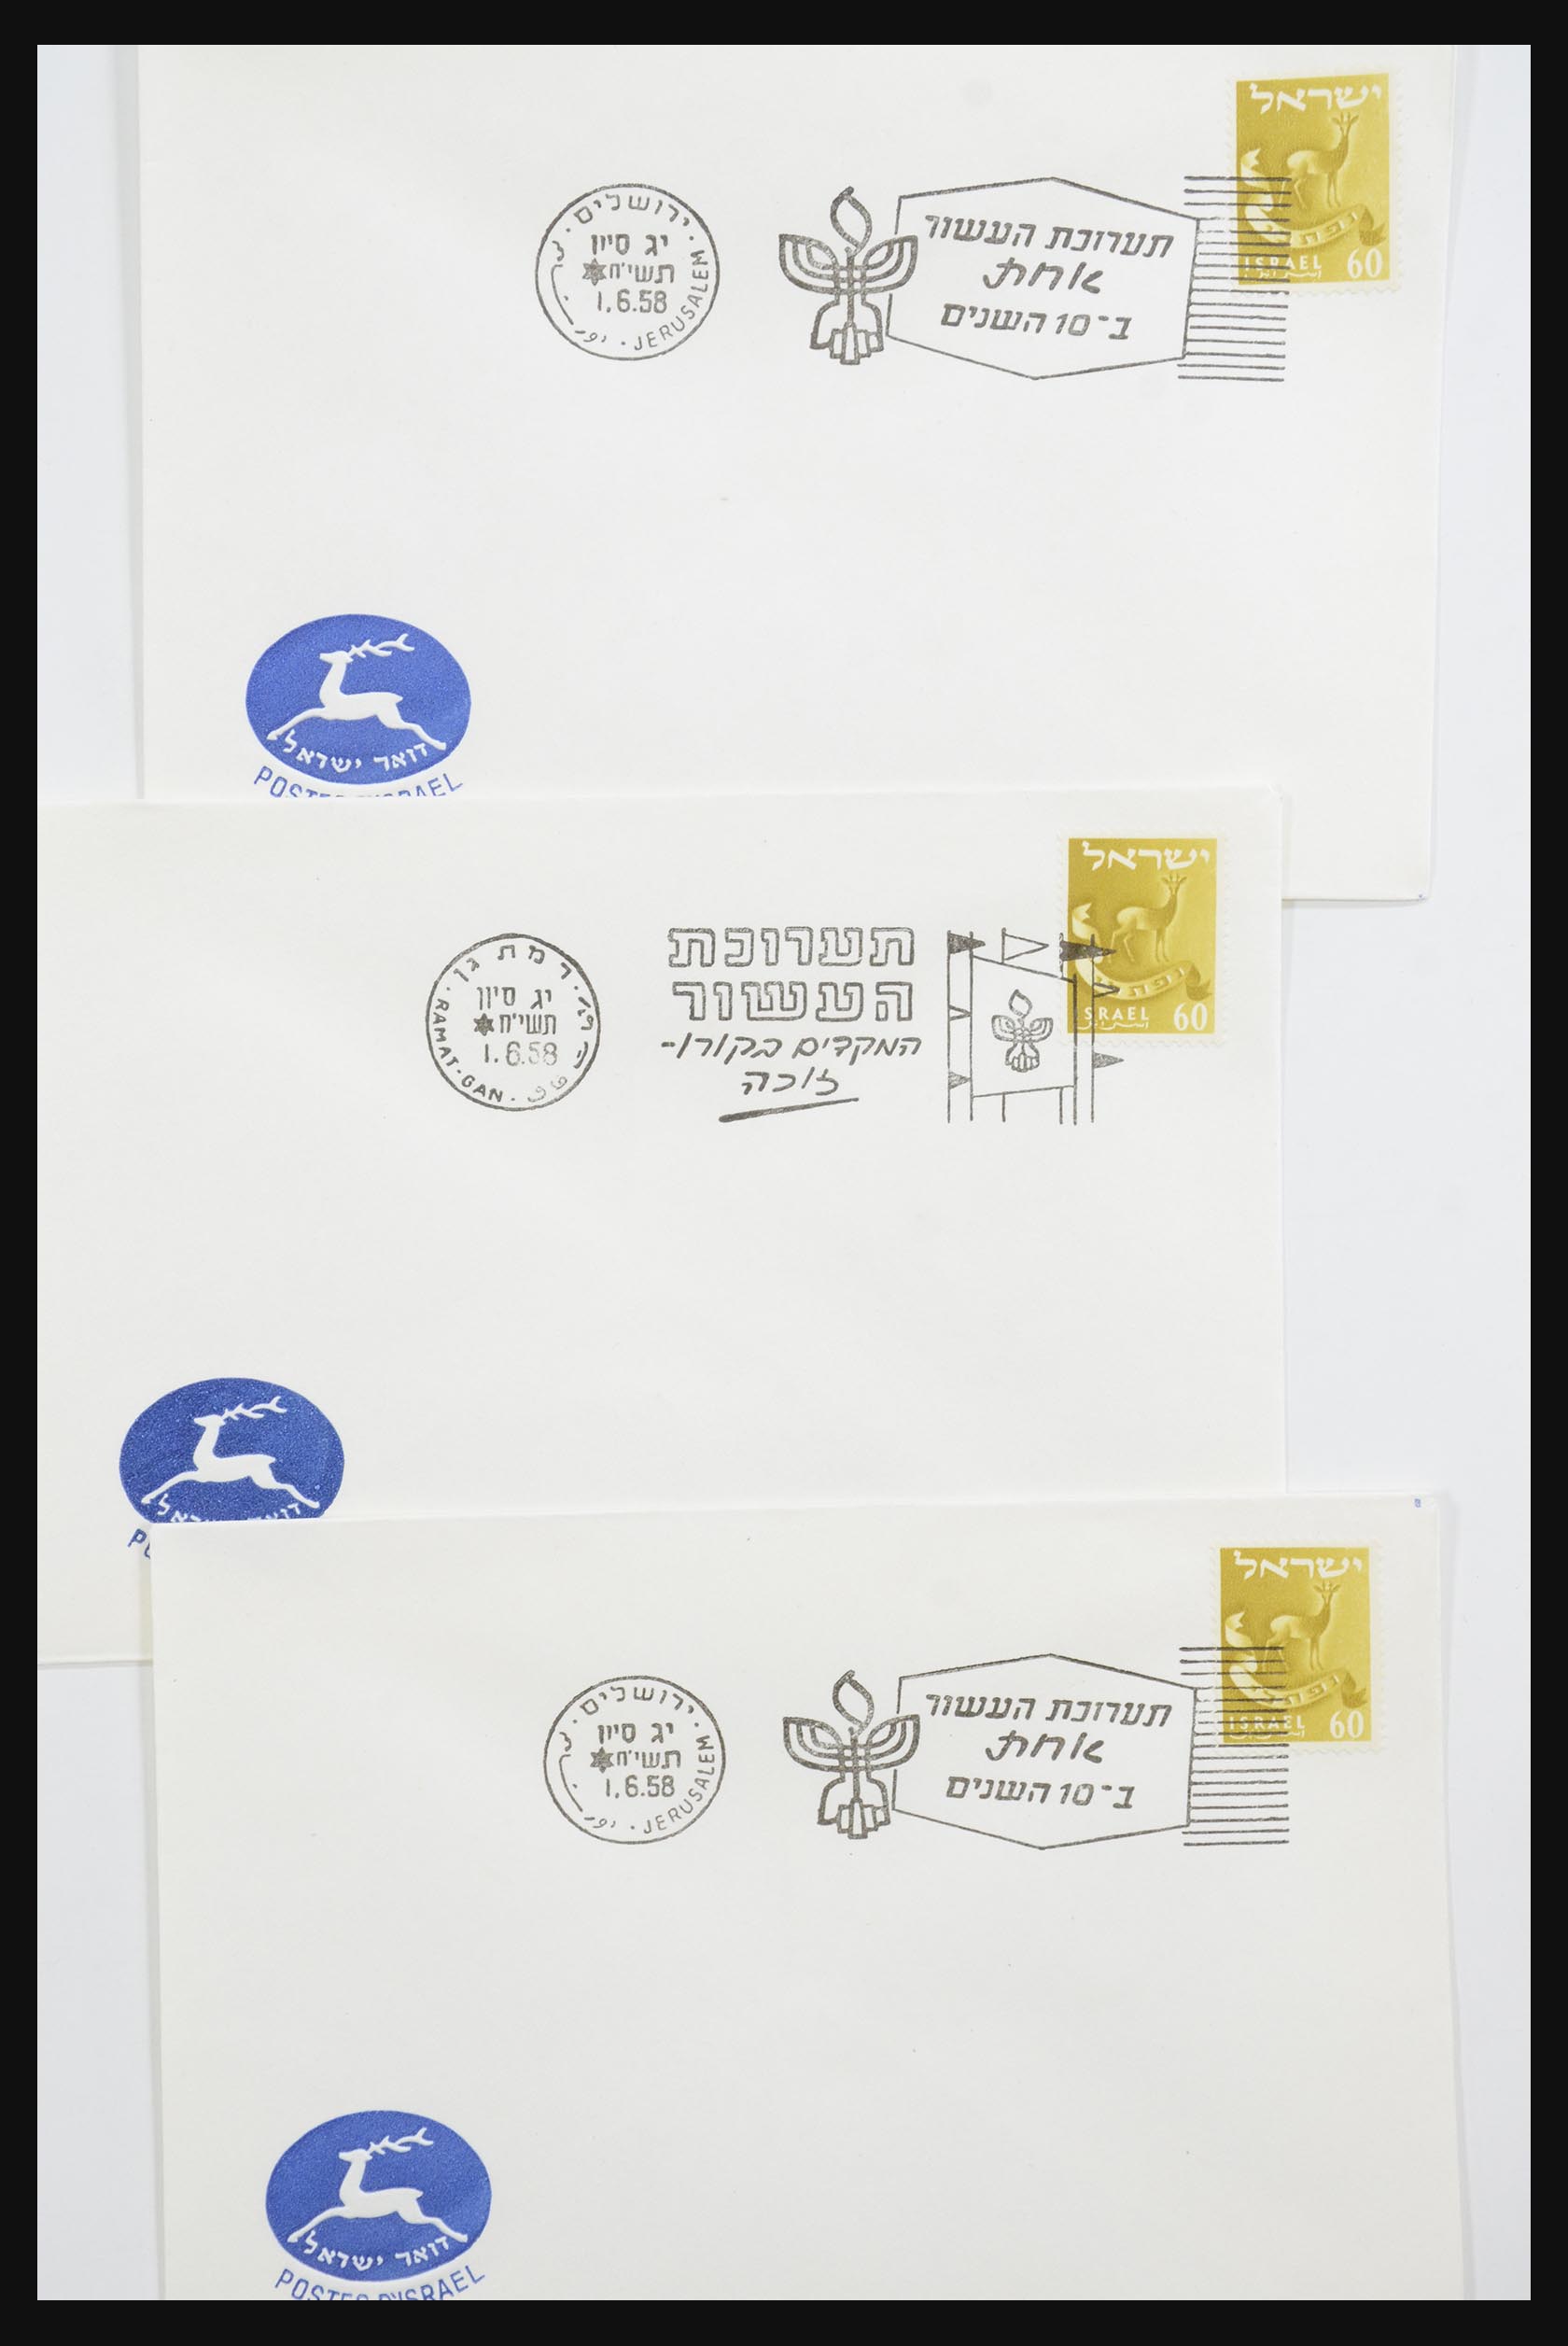 31924 038 - 31924 Israel first day cover collection 1957-2003.